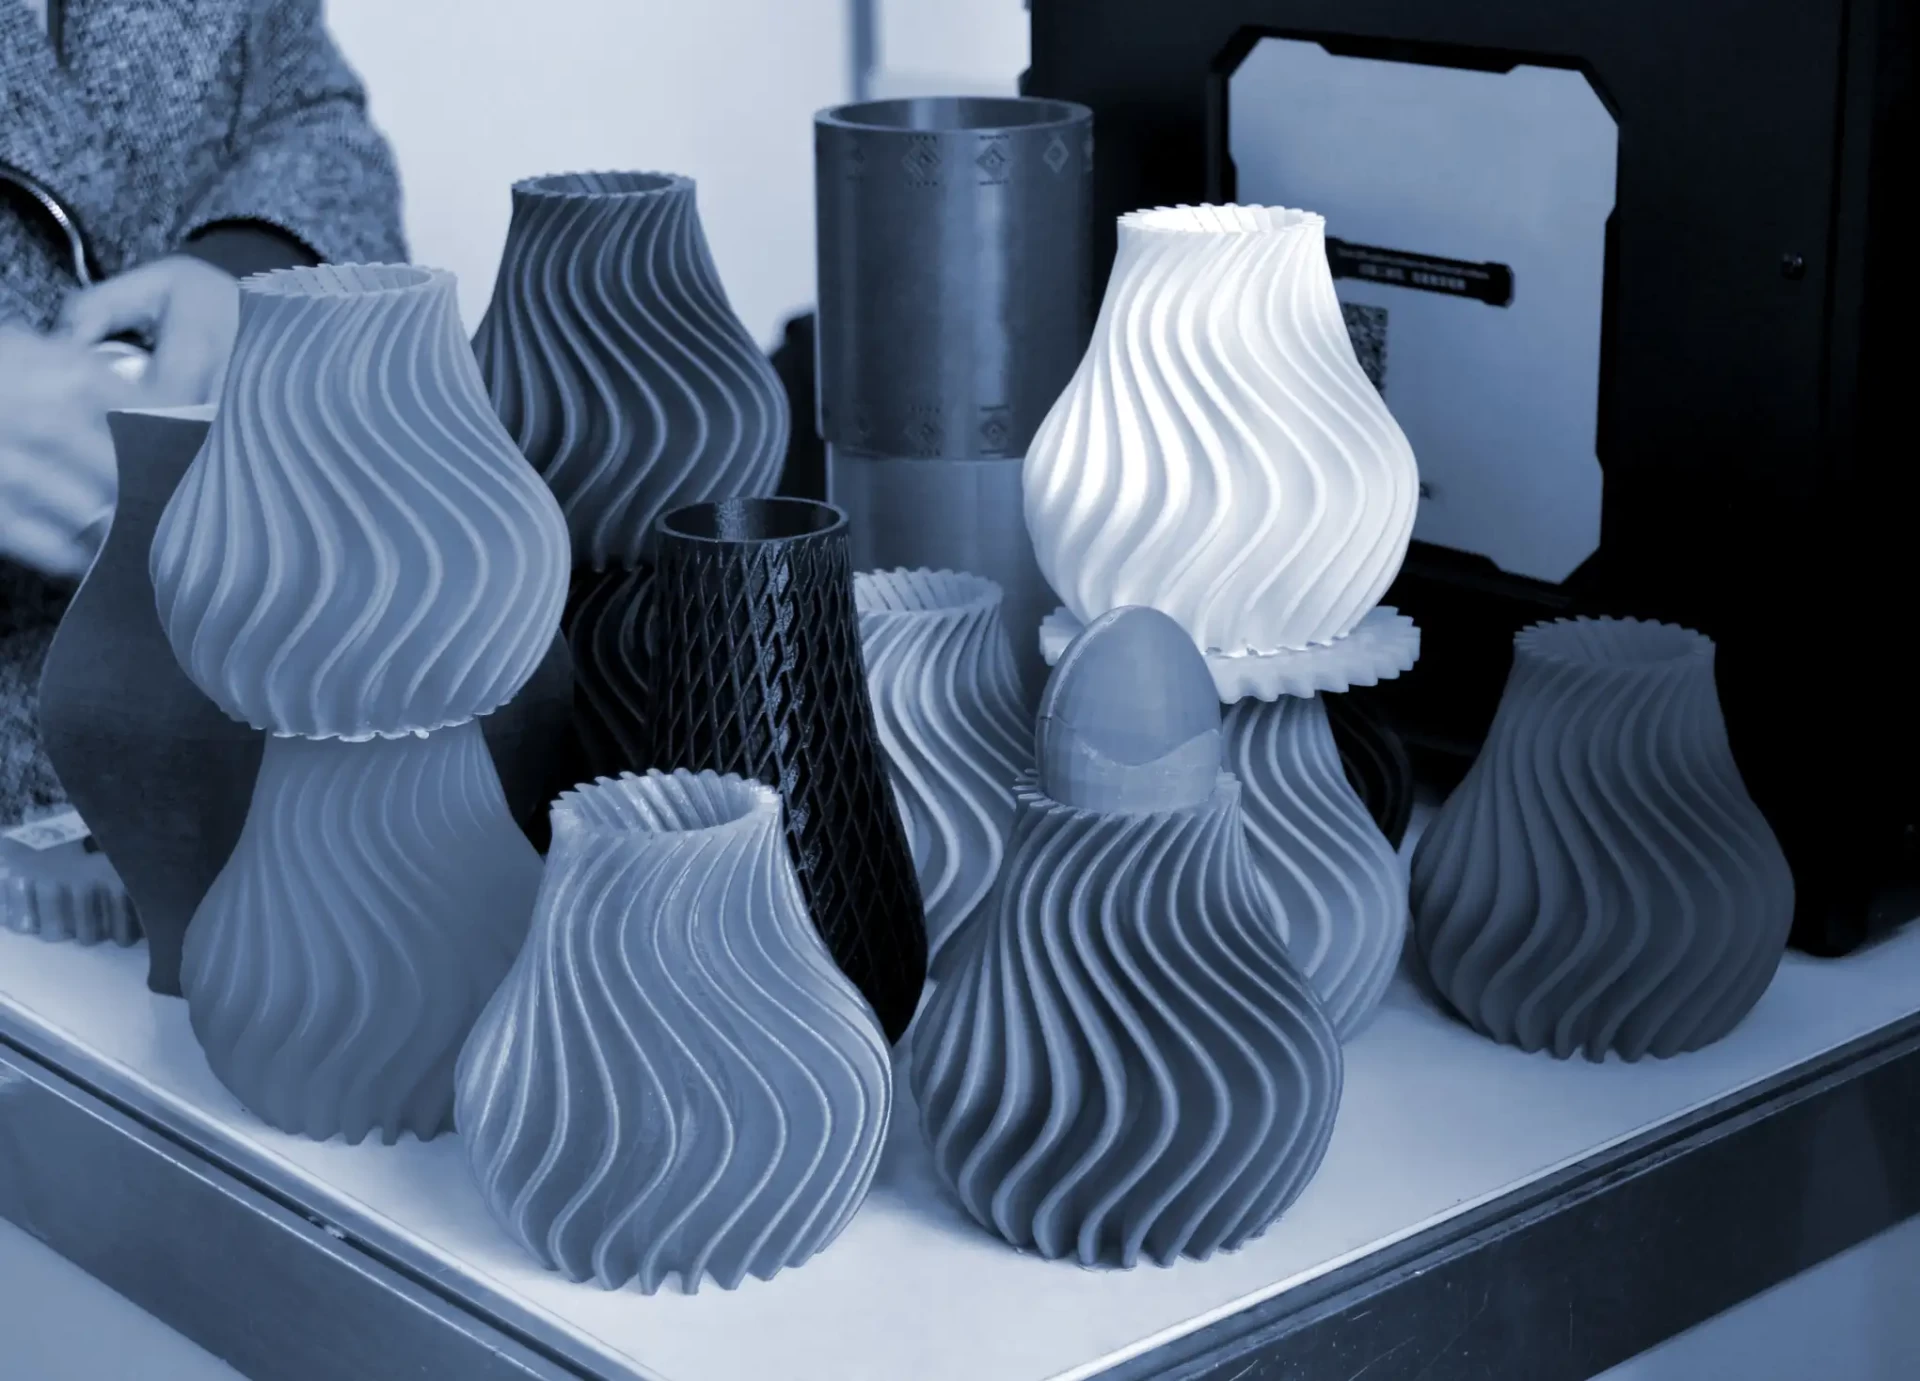 How does SLA 3D Printing Compare to DLP and FDM 3D Printing Technologies?